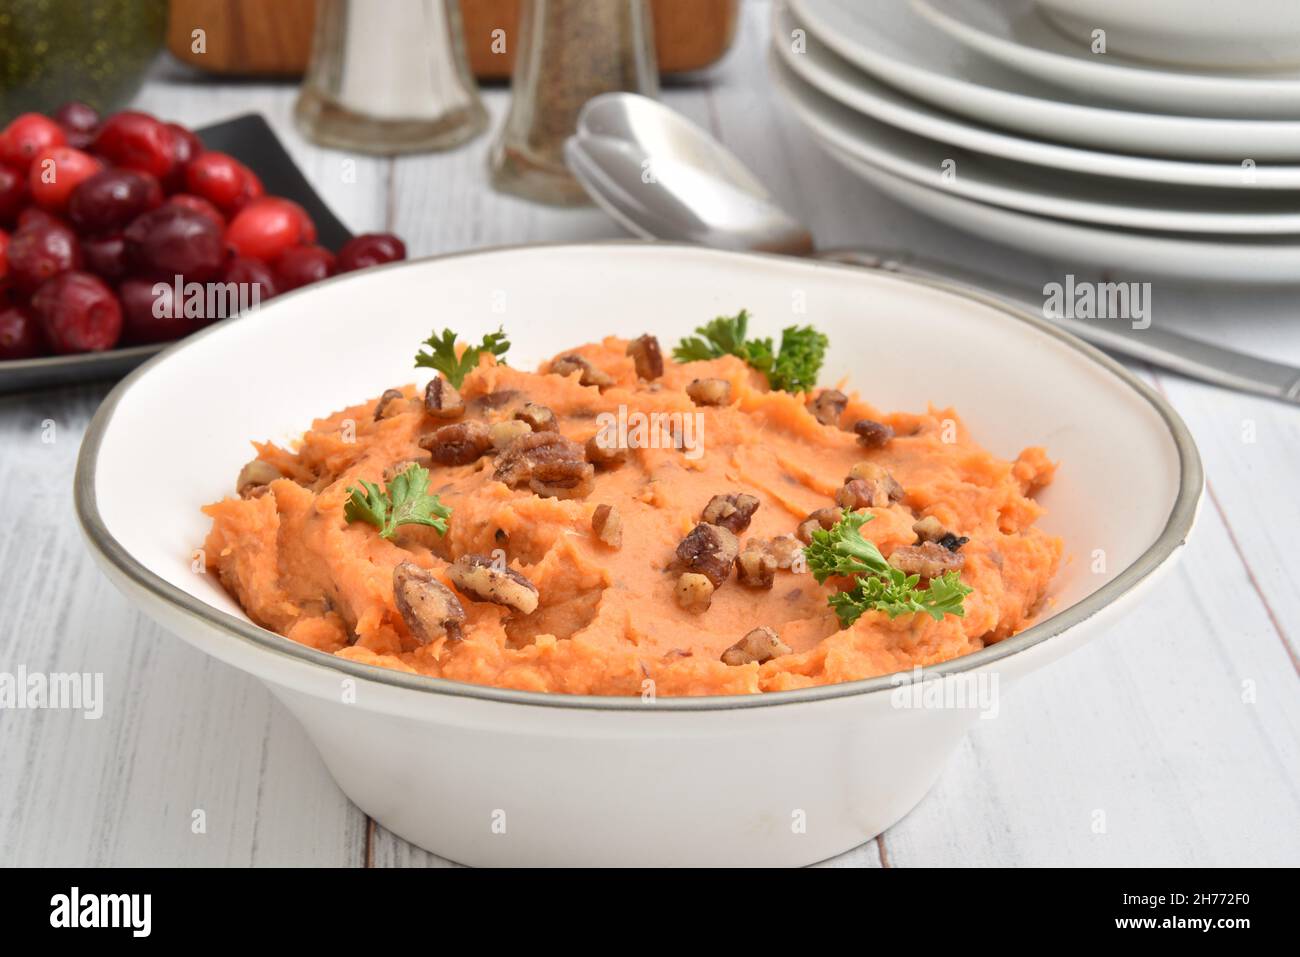 A bowl of homemade mashed potatoes with glazed pecans on a wooden table Stock Photo